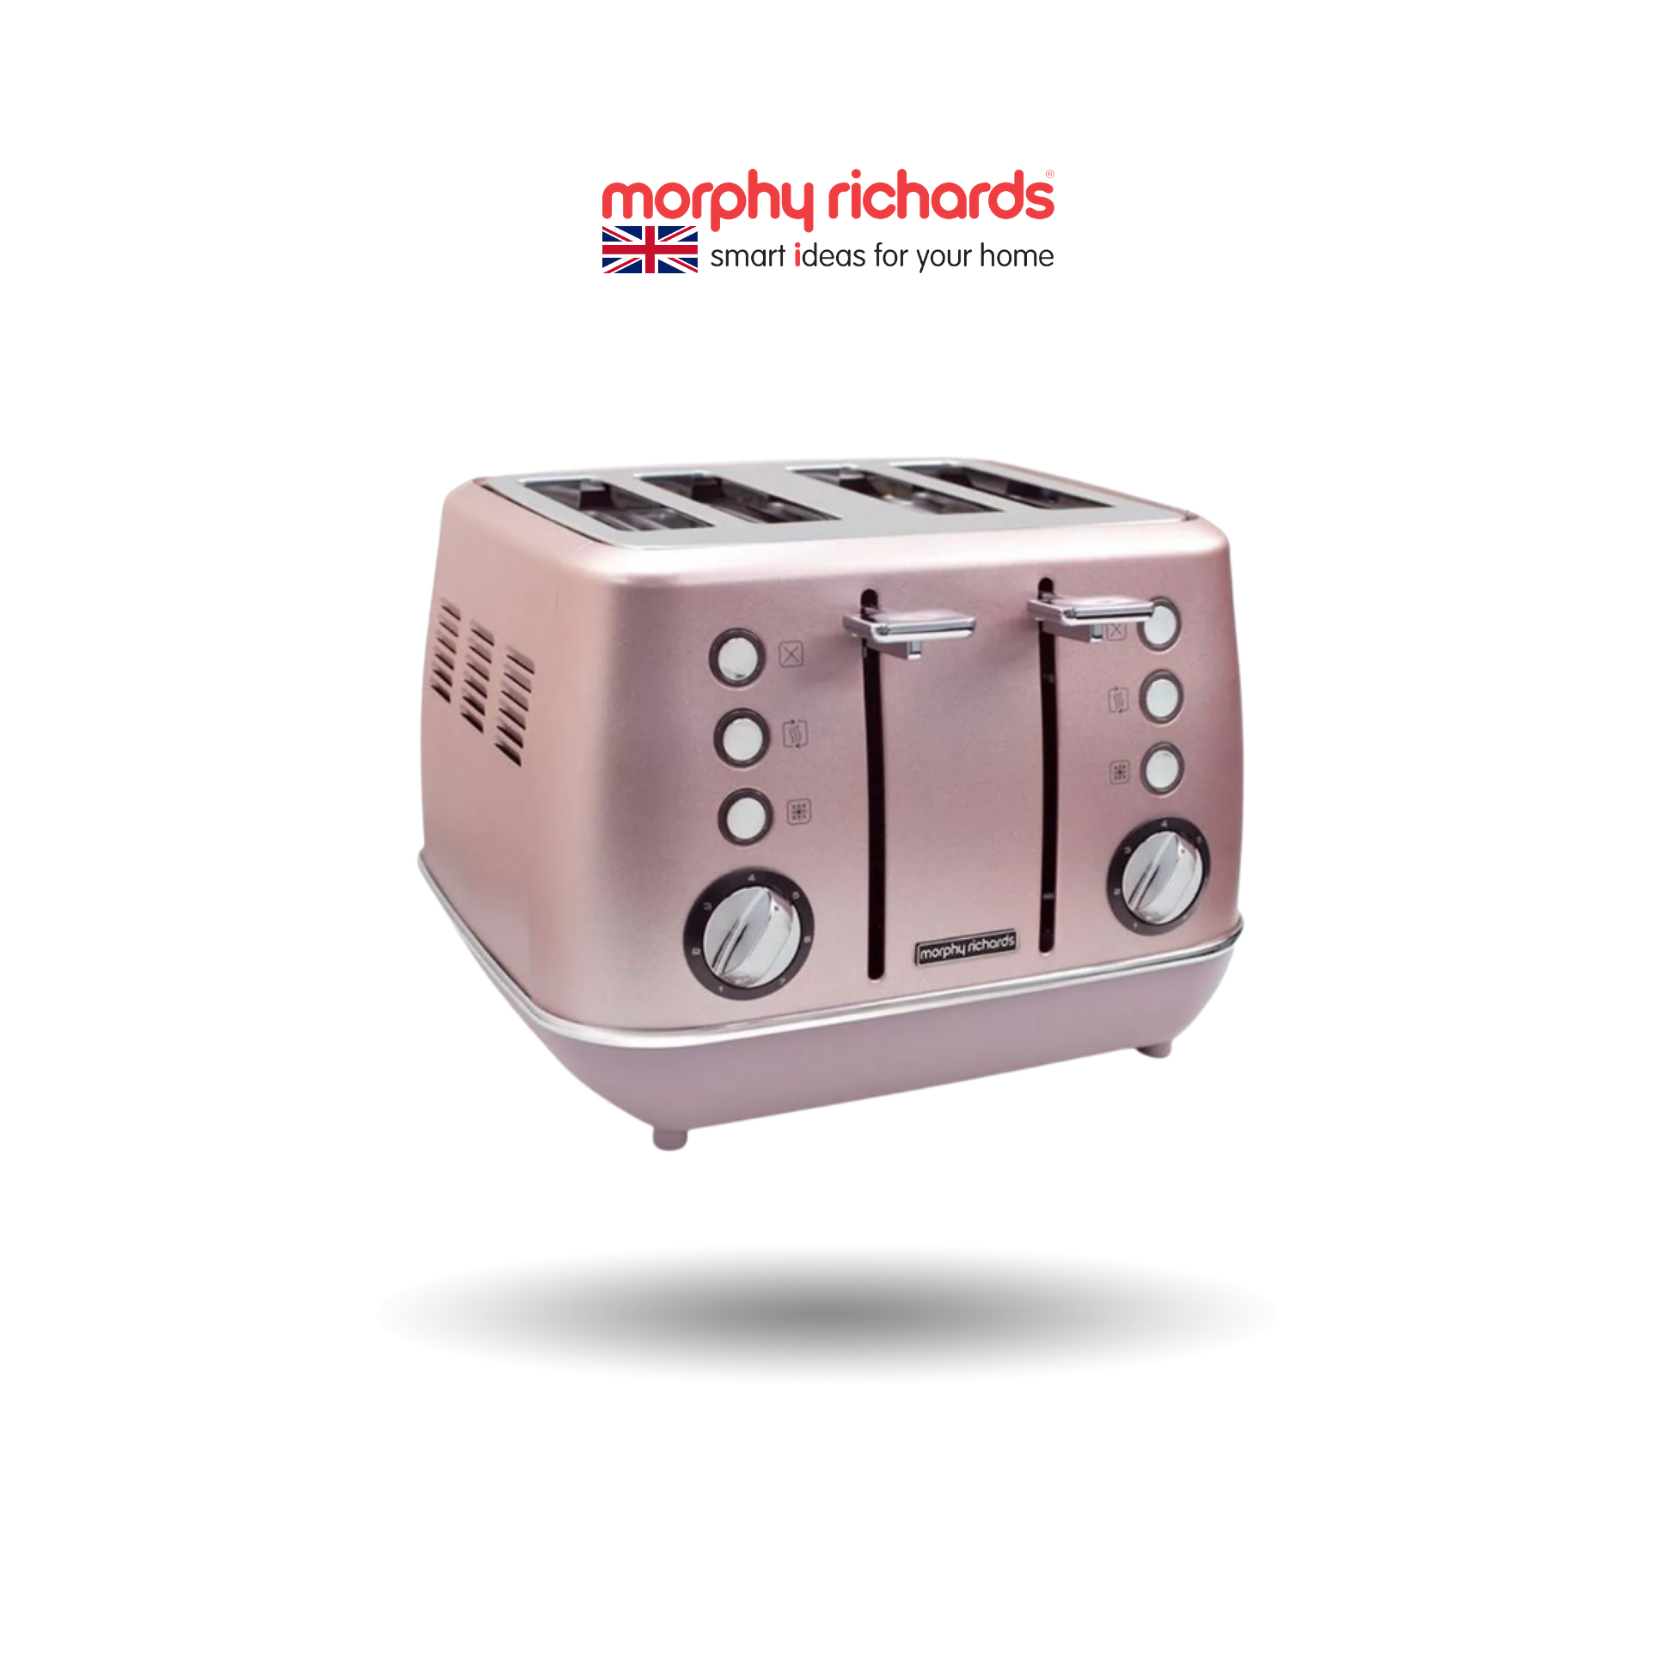 Morphy Richards Evoke 4 Slice Toaster Rose Quartz - Variable Browning Control | Removable Crumb Tray | Cord Storage